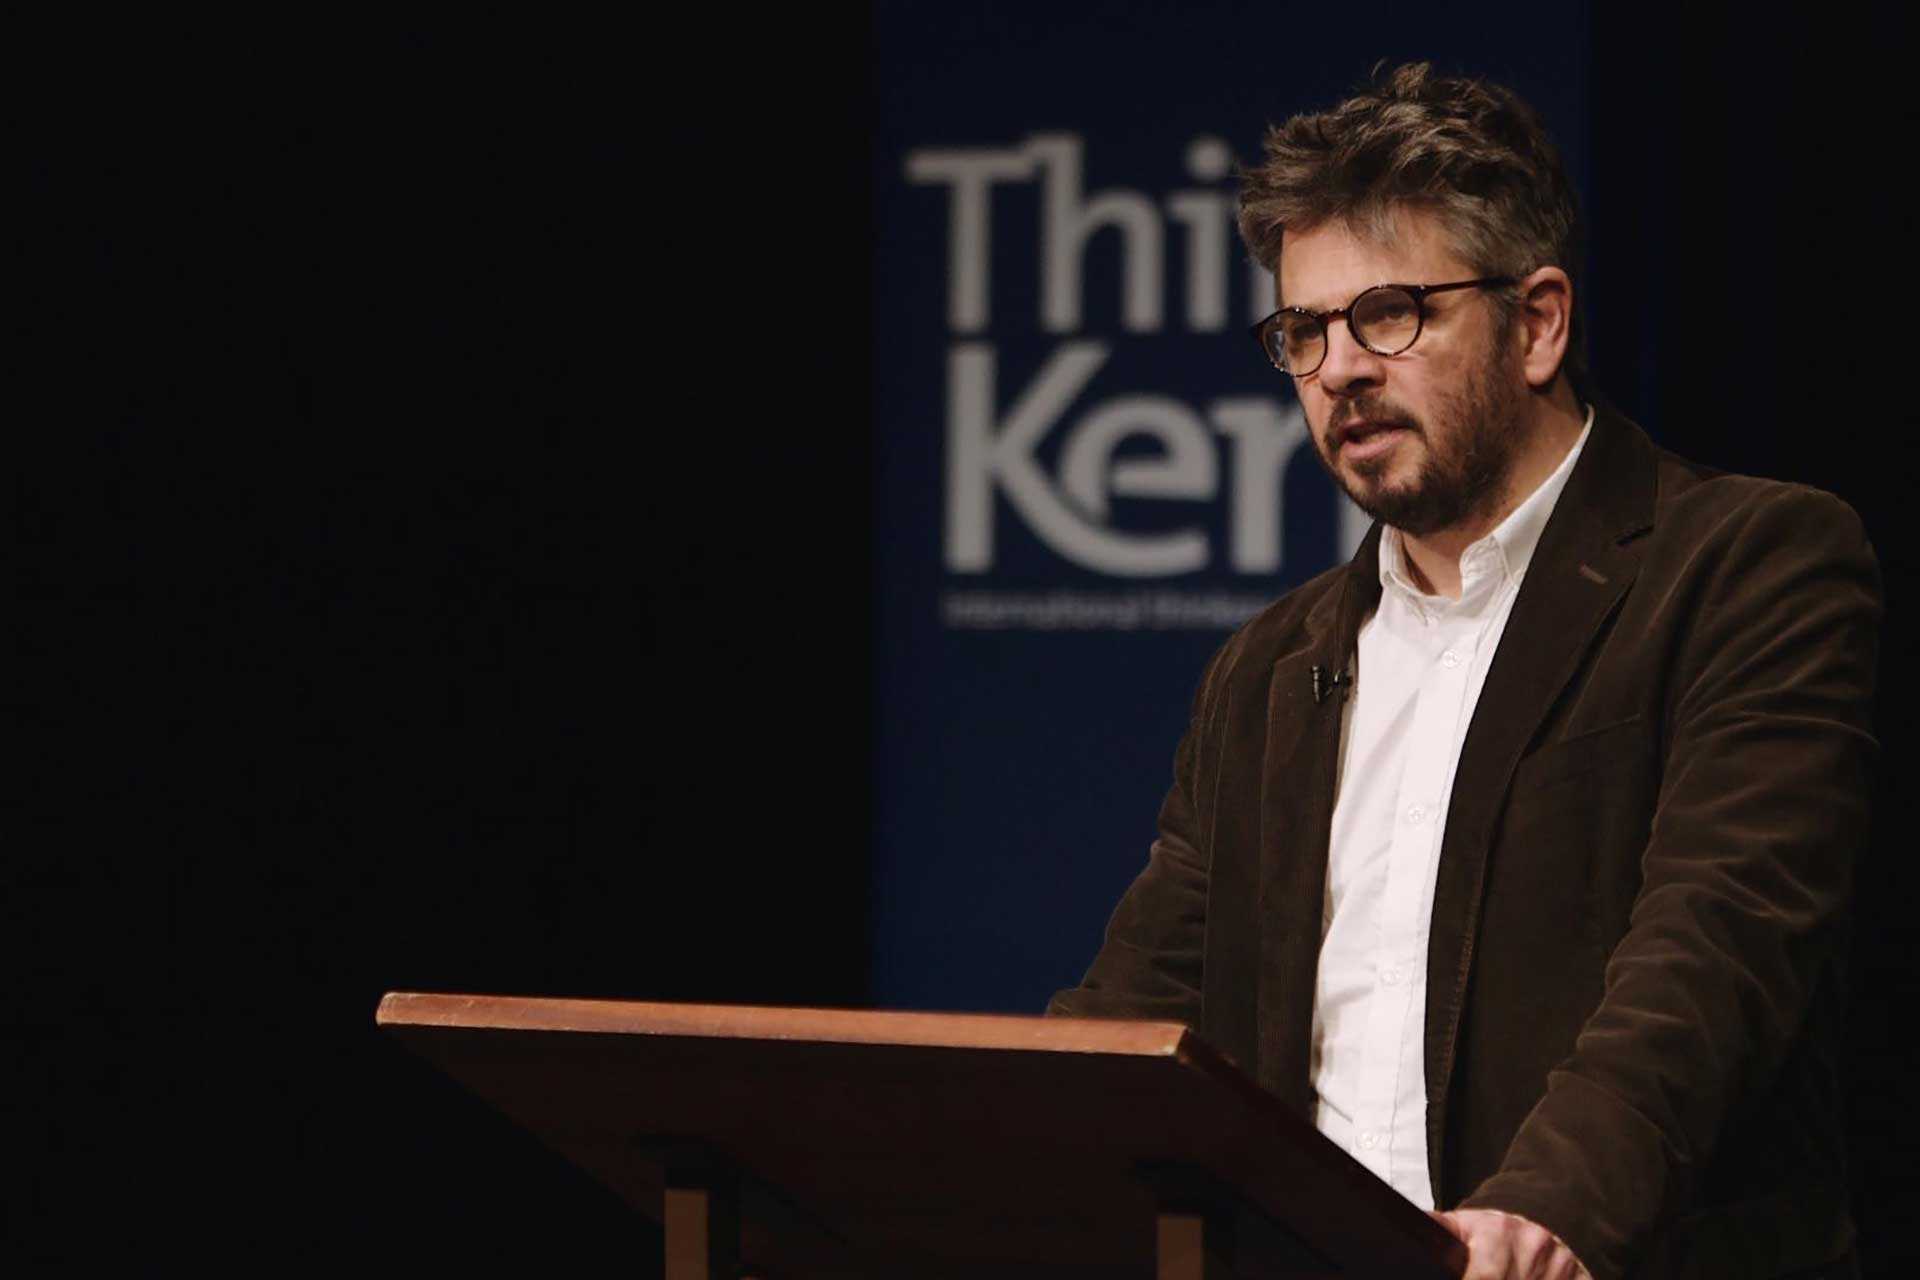 David Herd Think Kent lecture